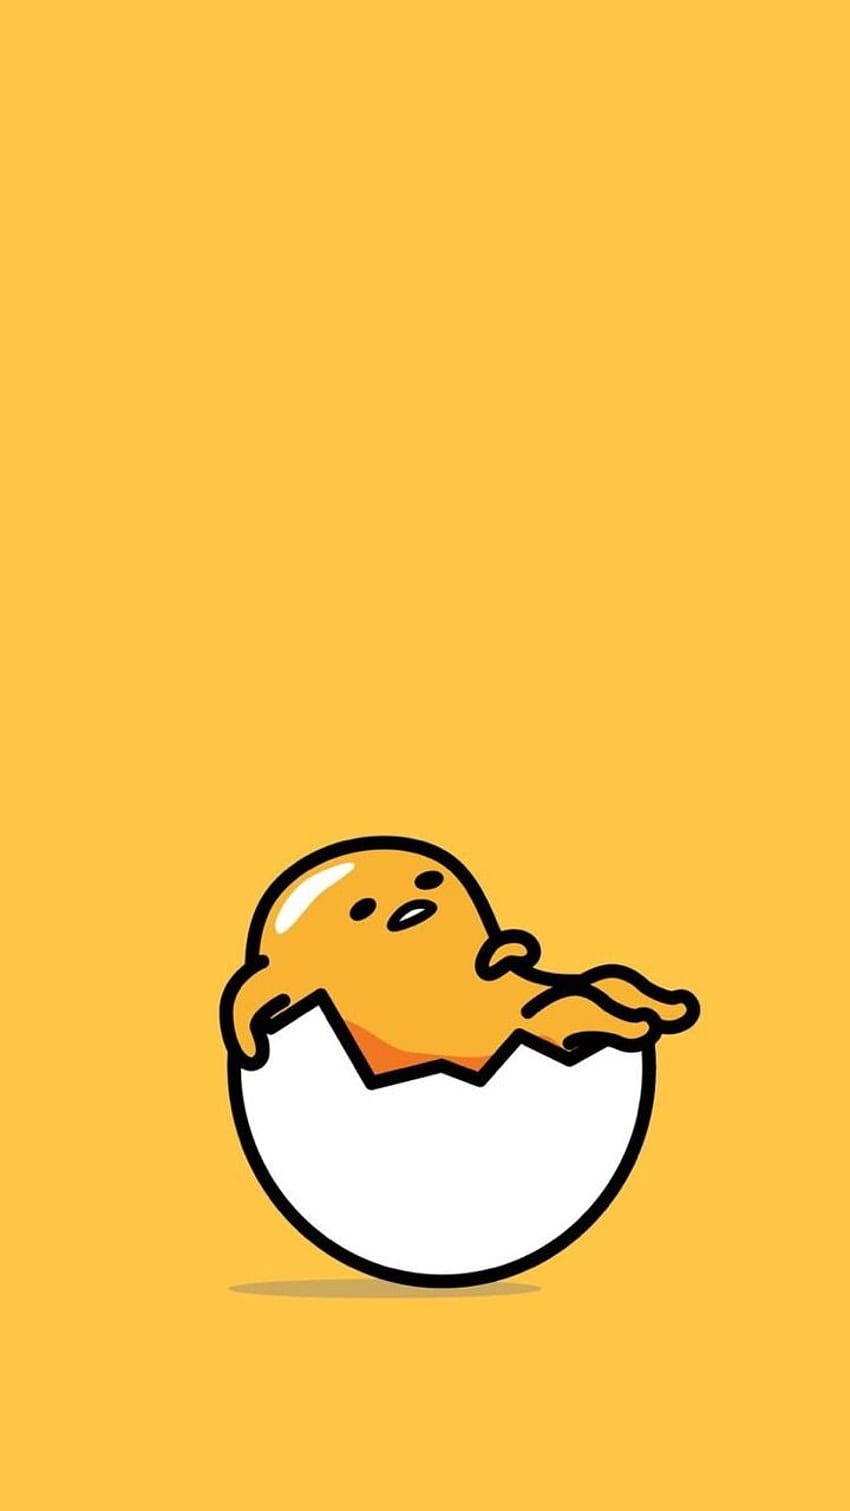 Gudetama, the lazy egg from Sanrio, is one of the most popular characters in the world. - Egg